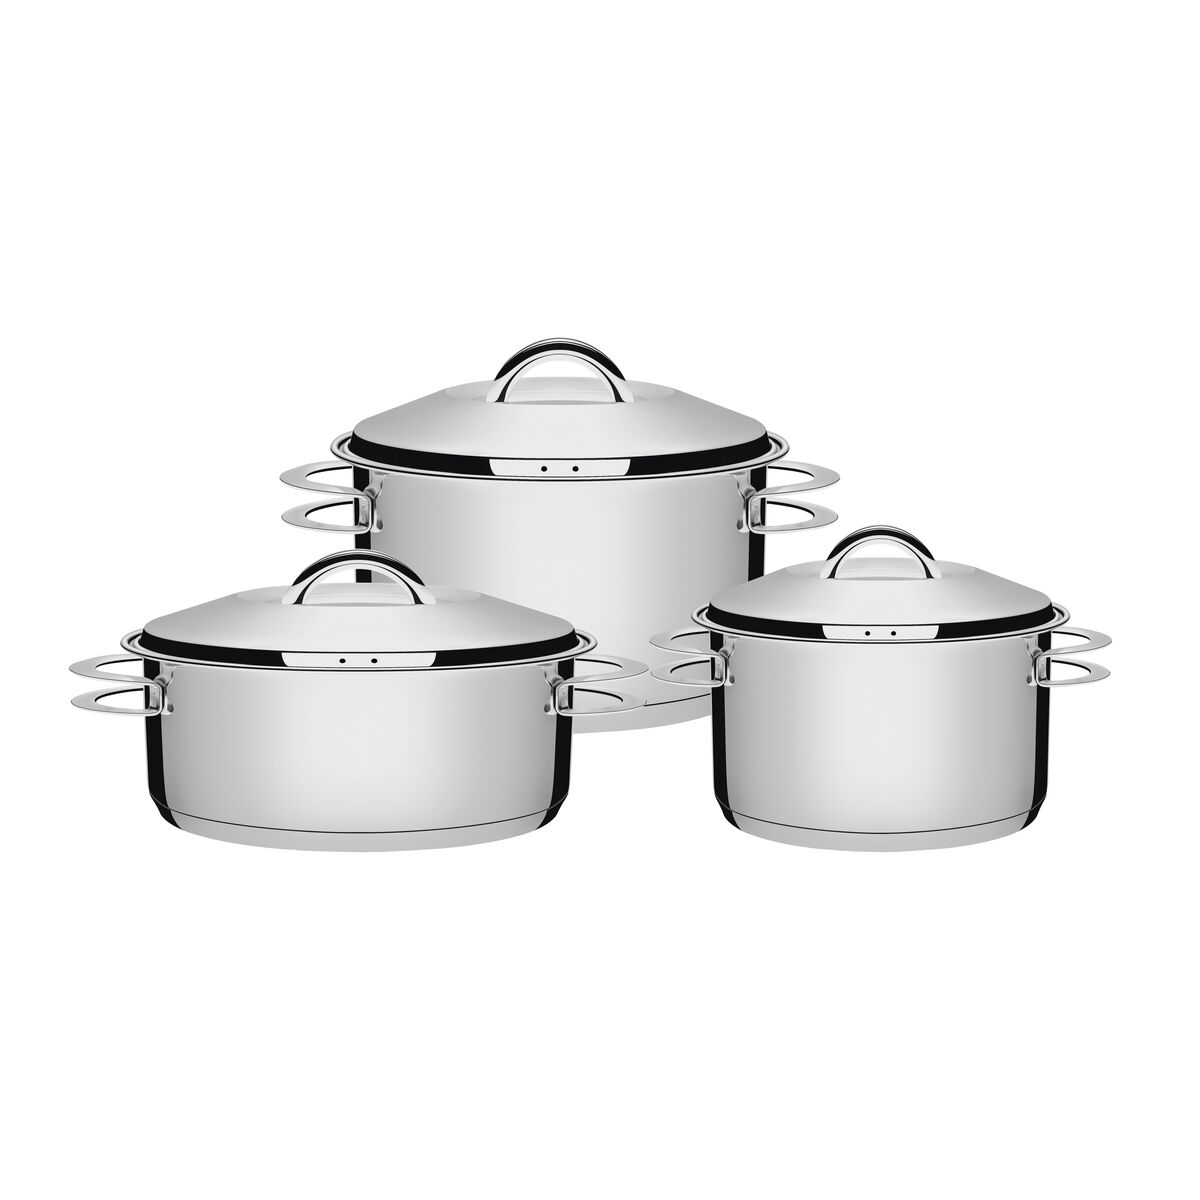 Tramontina Solar stainless steel casserole dish set with tri-ply base, 3 pc set